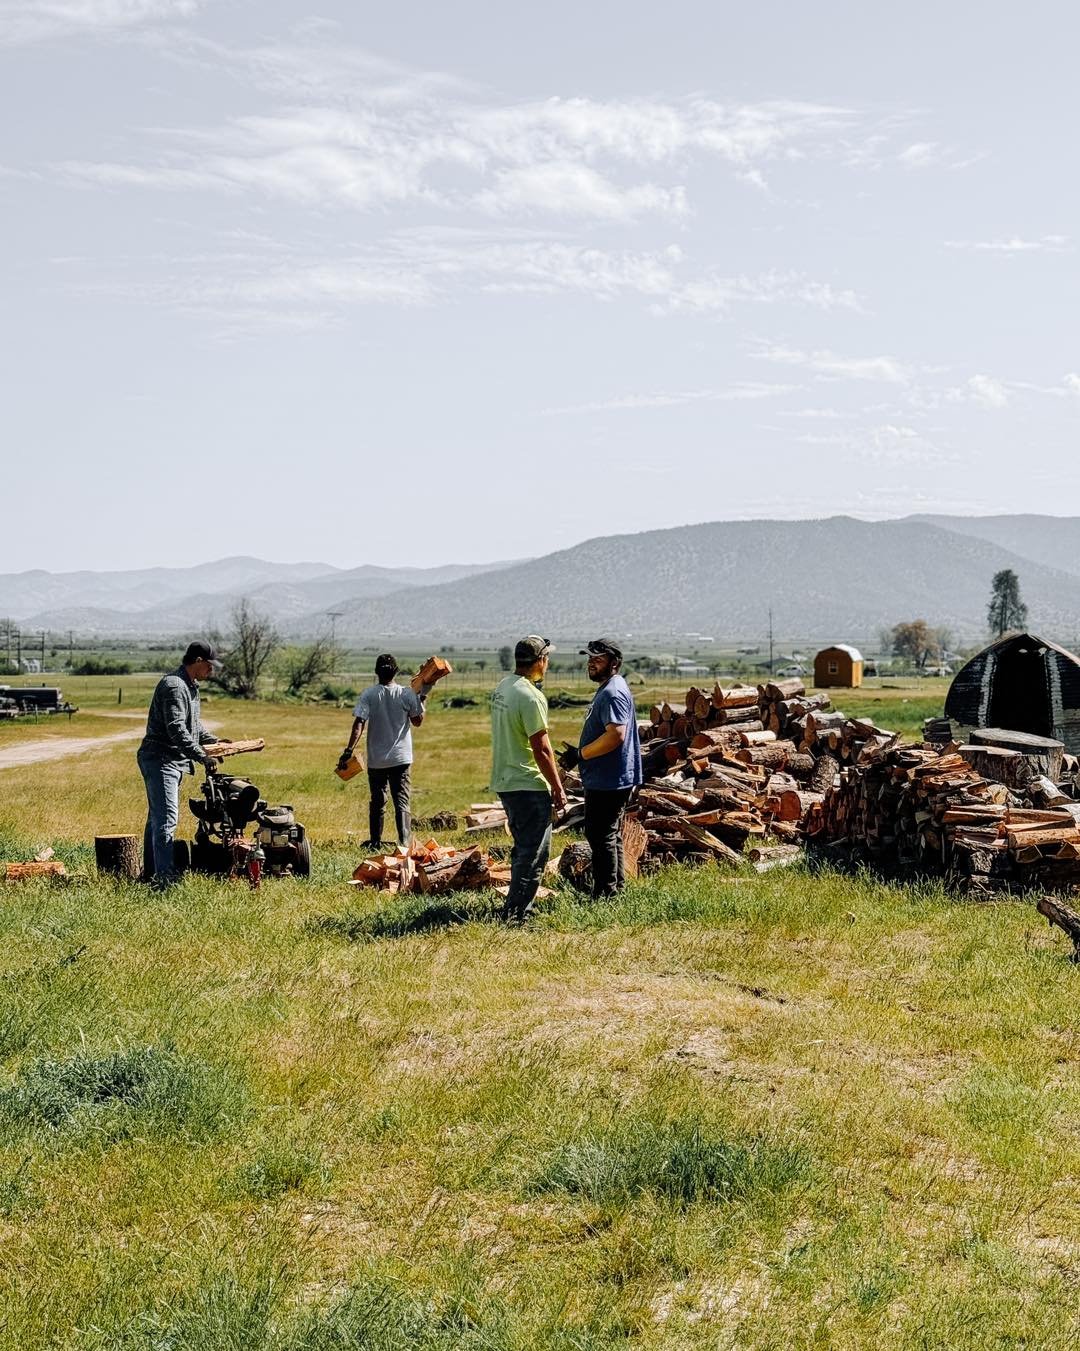 Students have projects on the ranch throughout the week alongside caring for all the animals. Some recent projects have been painting, cooking, landscaping and a whole lot of chopping wood to fill up the sheds for the winter! 🪵🪓

#liferestoration #